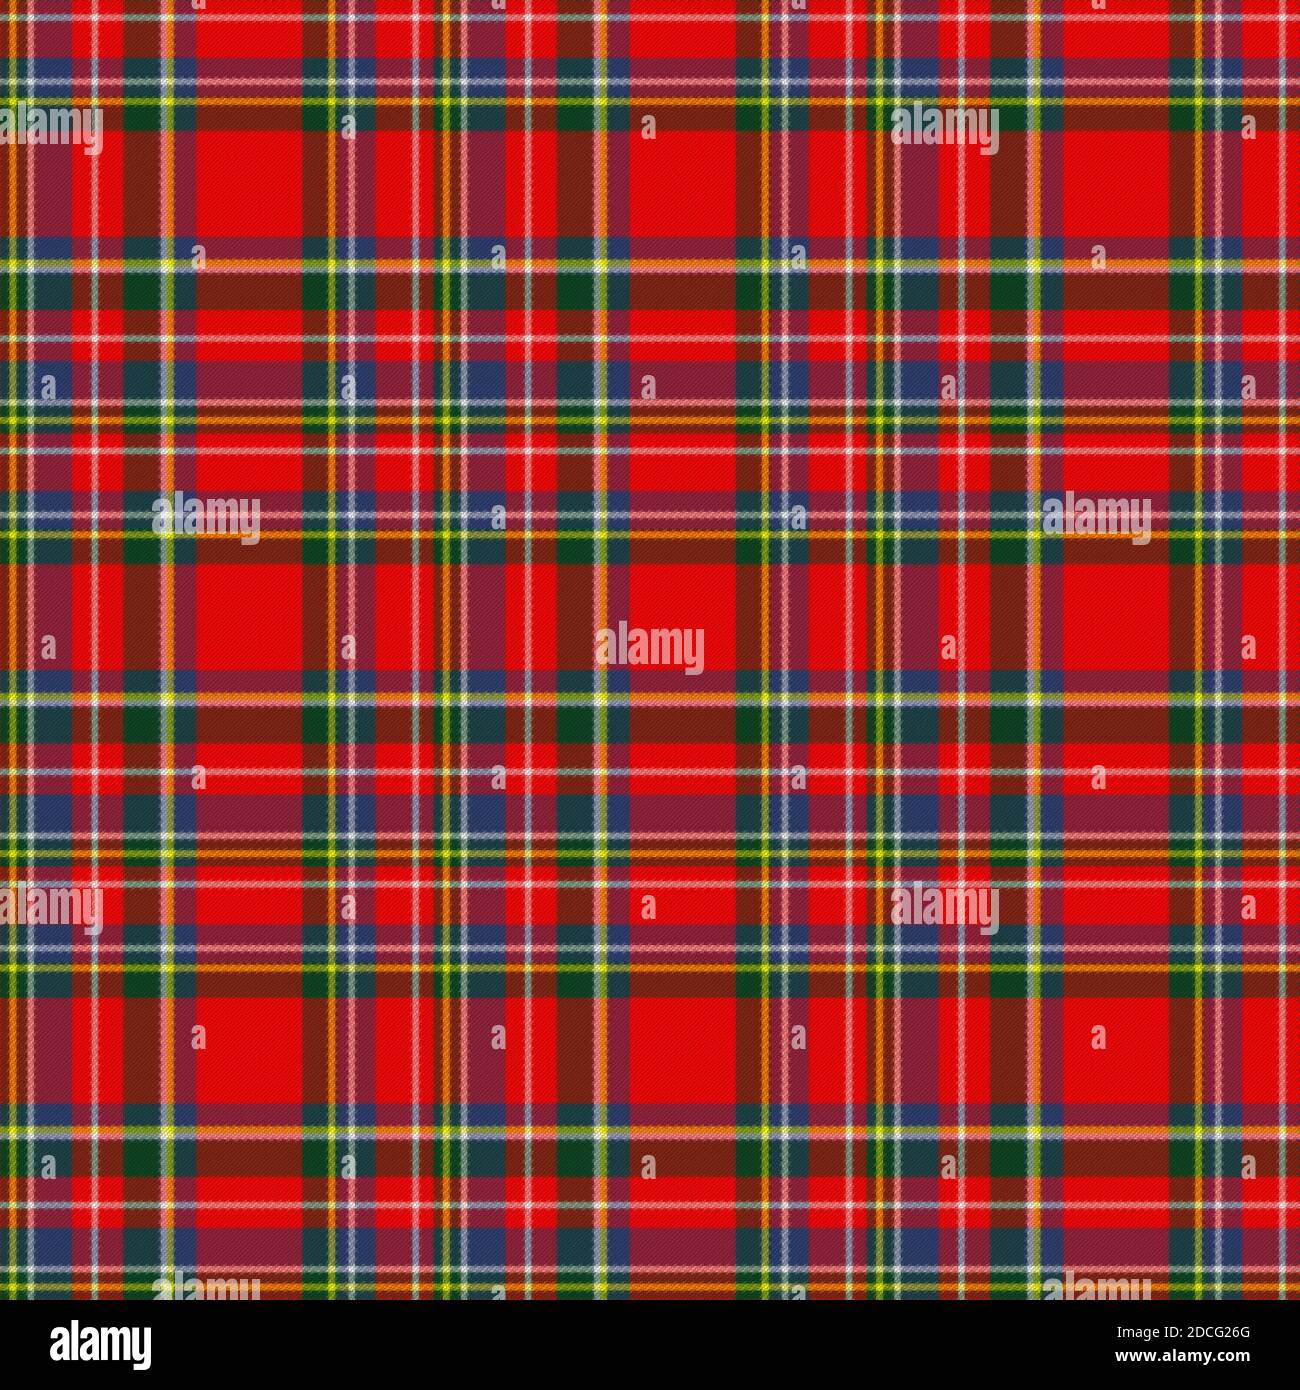 Classic style tartan with a red, green, blue and yellow woven plaid textured effect seamless tile illustraion Stock Photo